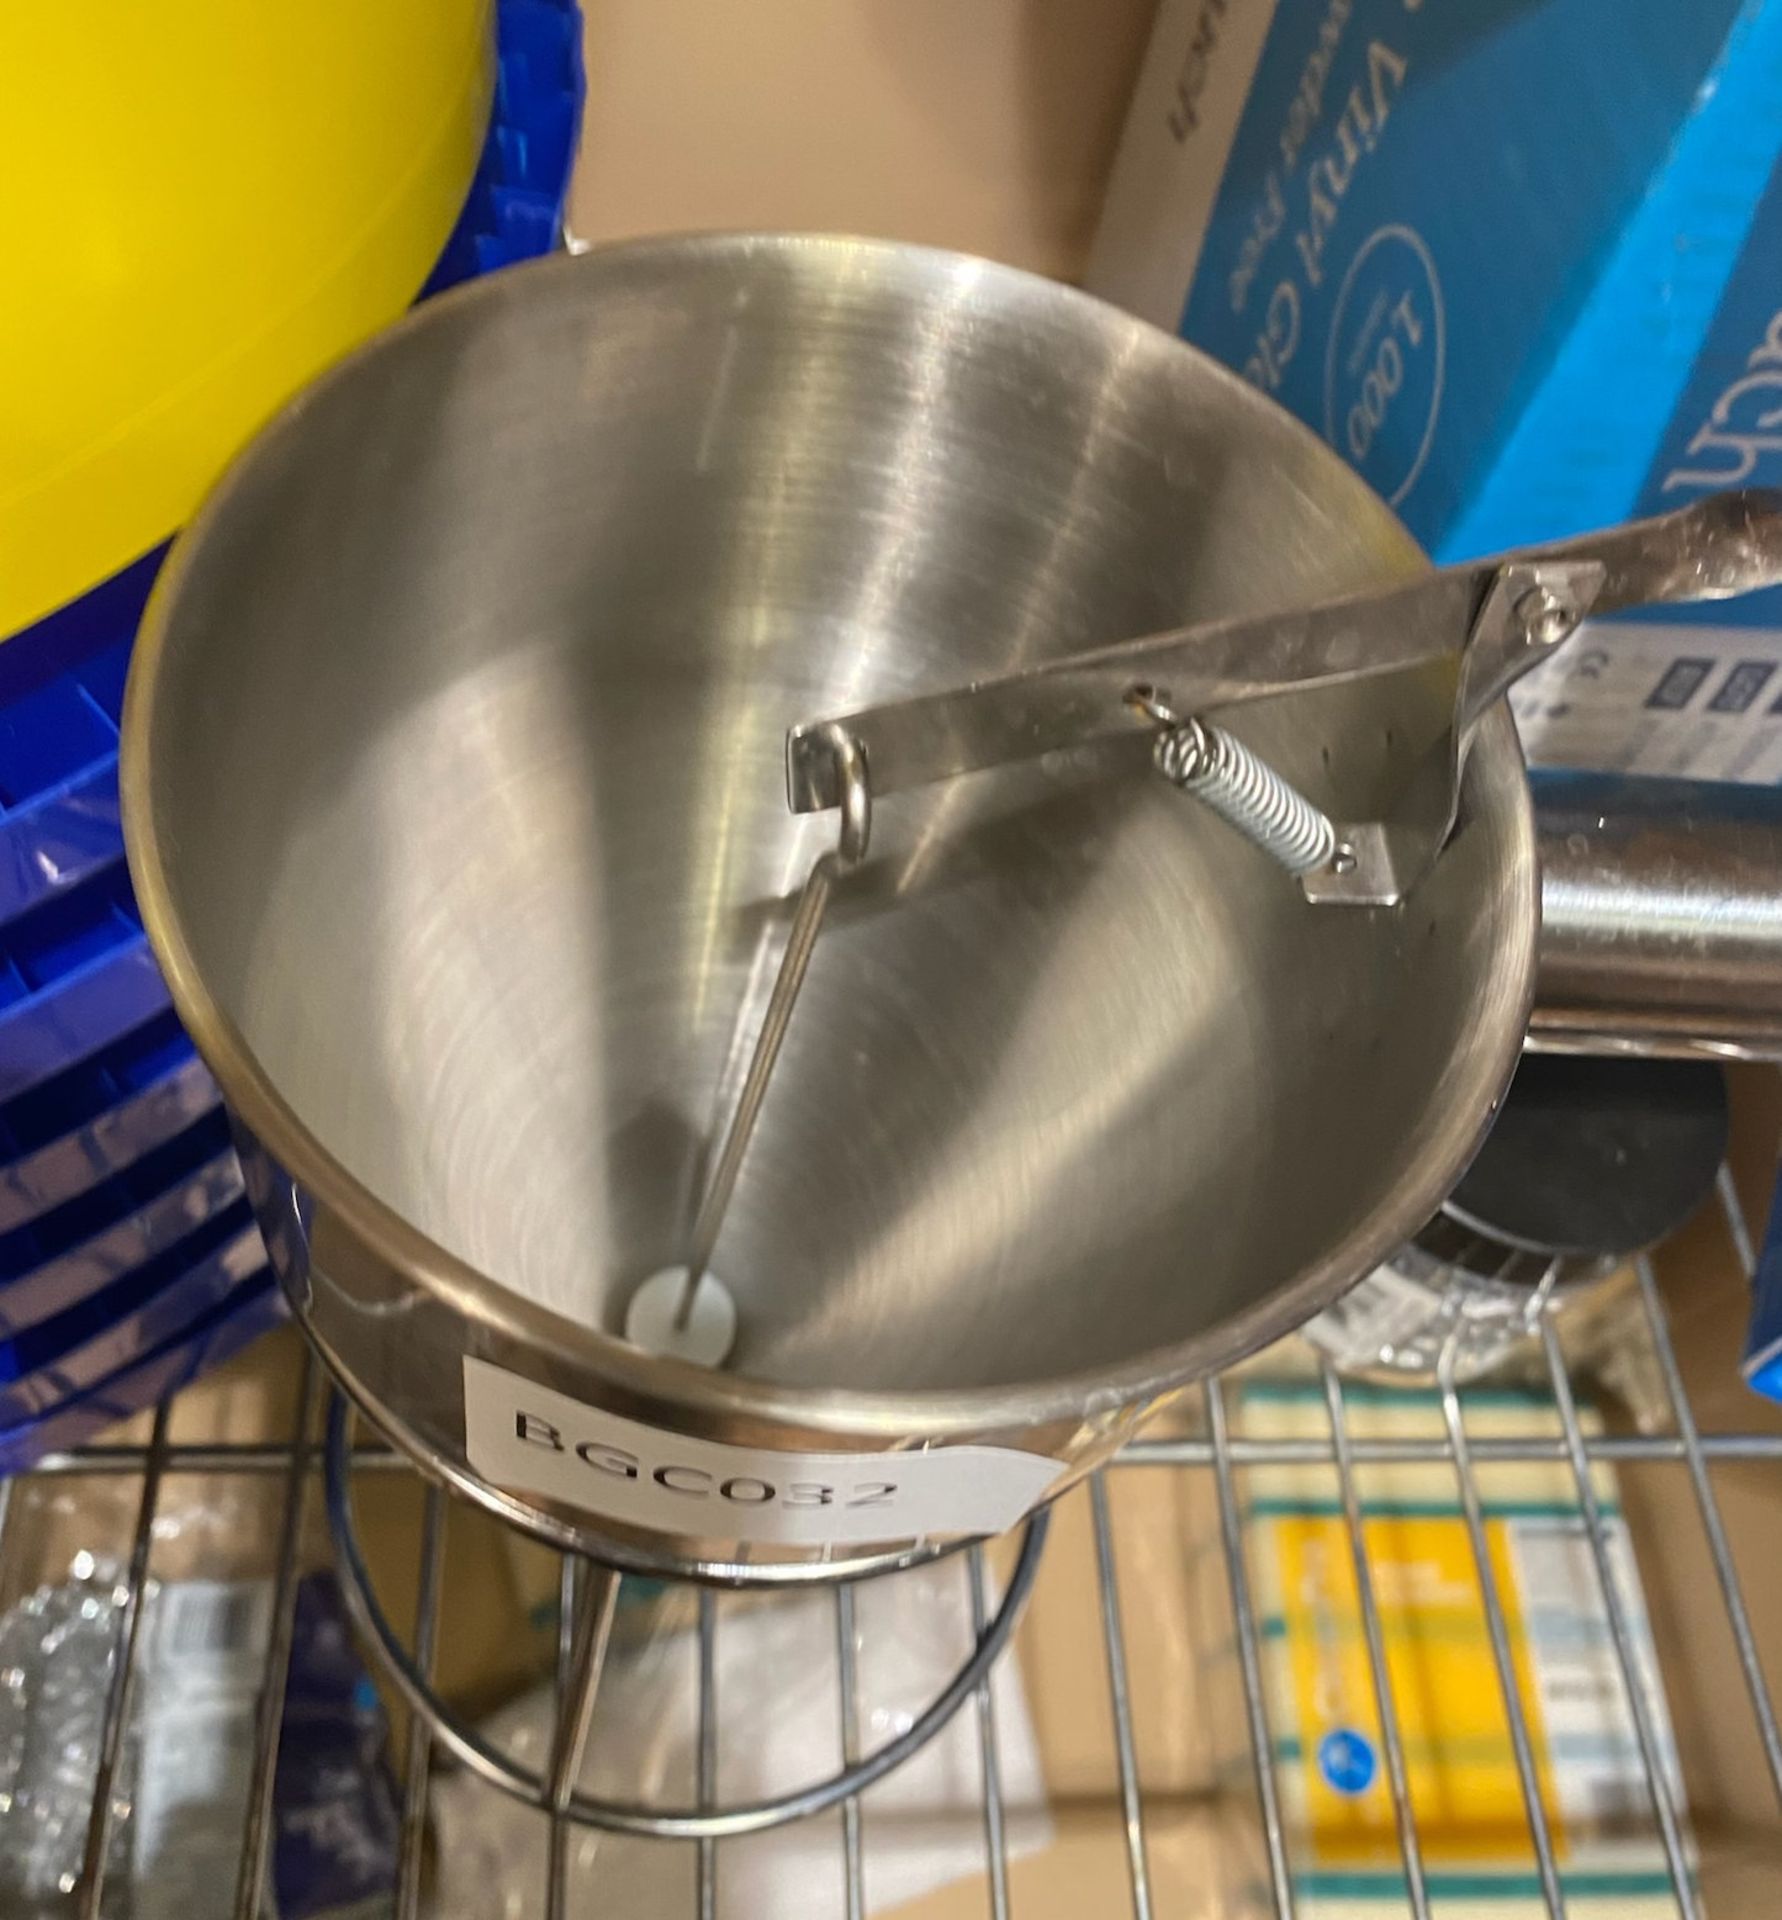 1 x Stainless Steel Piston Funnel For Dispensing Batters, Sauces And Coulis - Ref: BGC032 - - Image 2 of 2